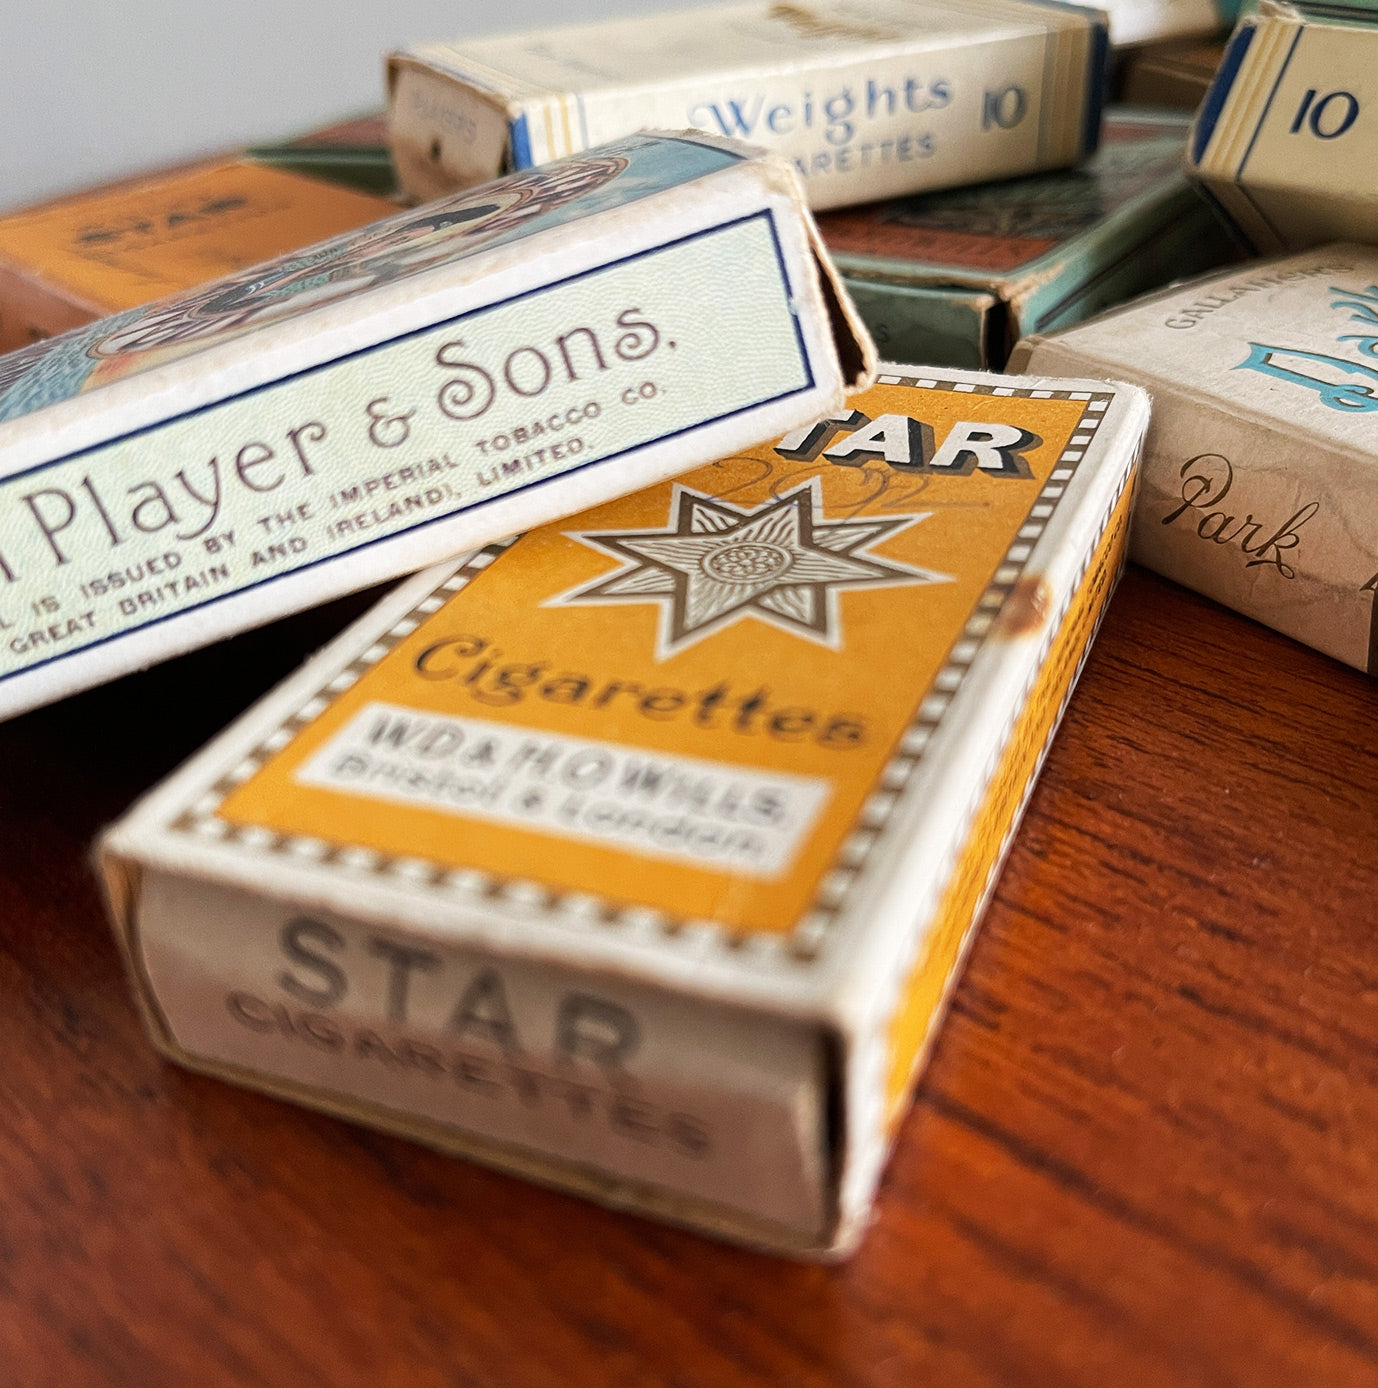 50 vintage cigarette packs are decorated with fantastic typography and imagery - SHOP NOW -  www.intovintage.co.uk